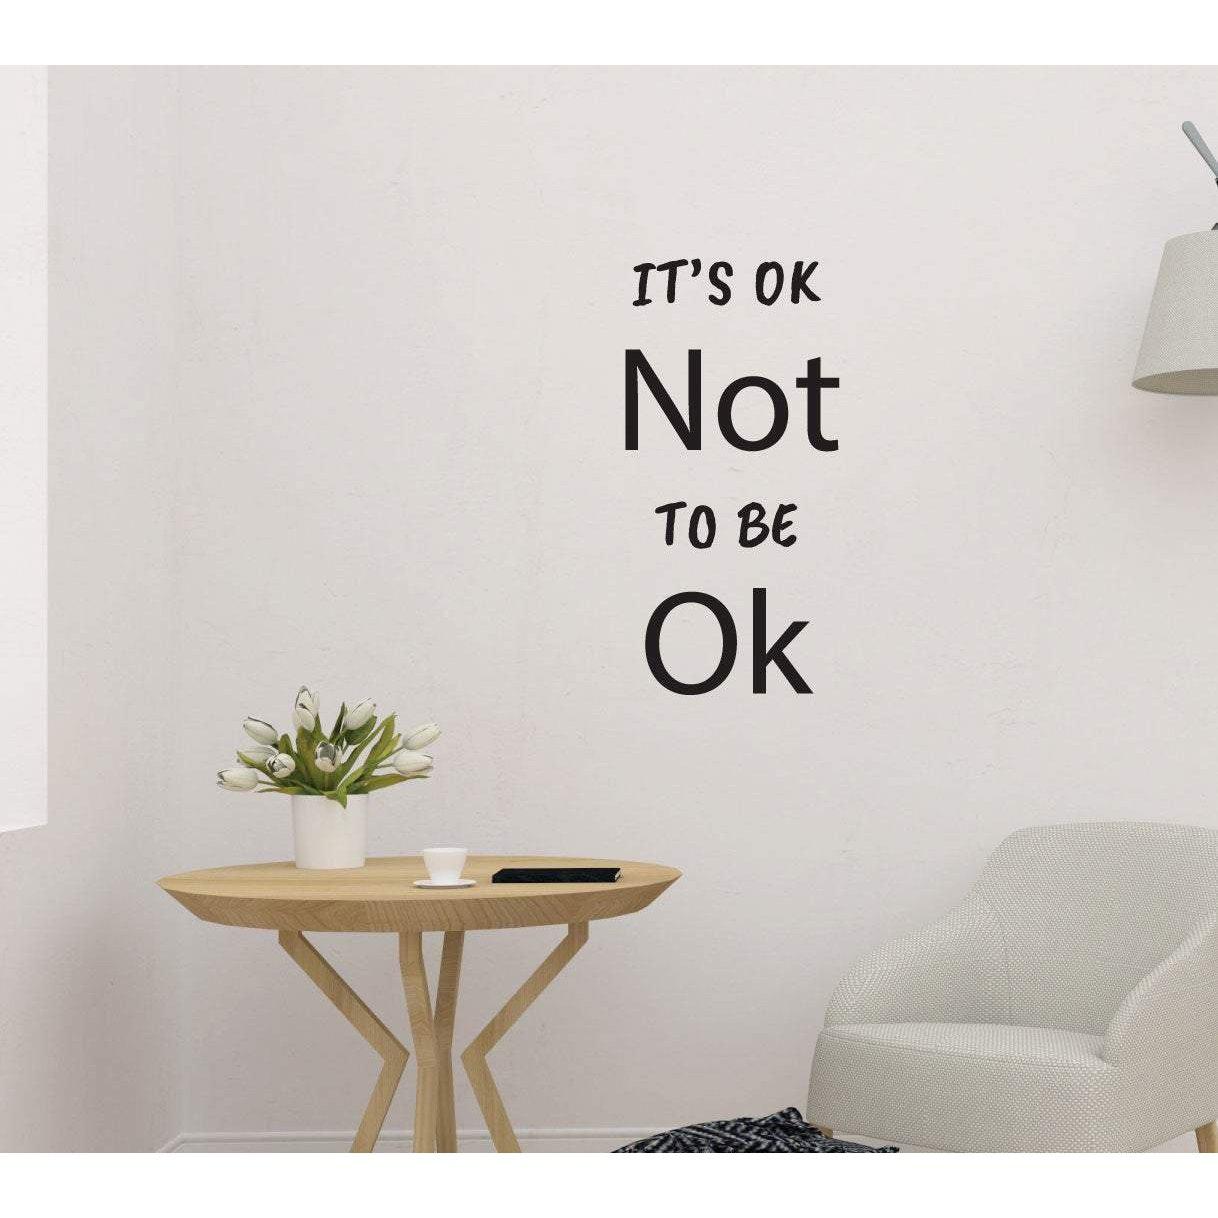 It's Ok Not To Be Ok Motivational Mental Health Wall Sticker Quote